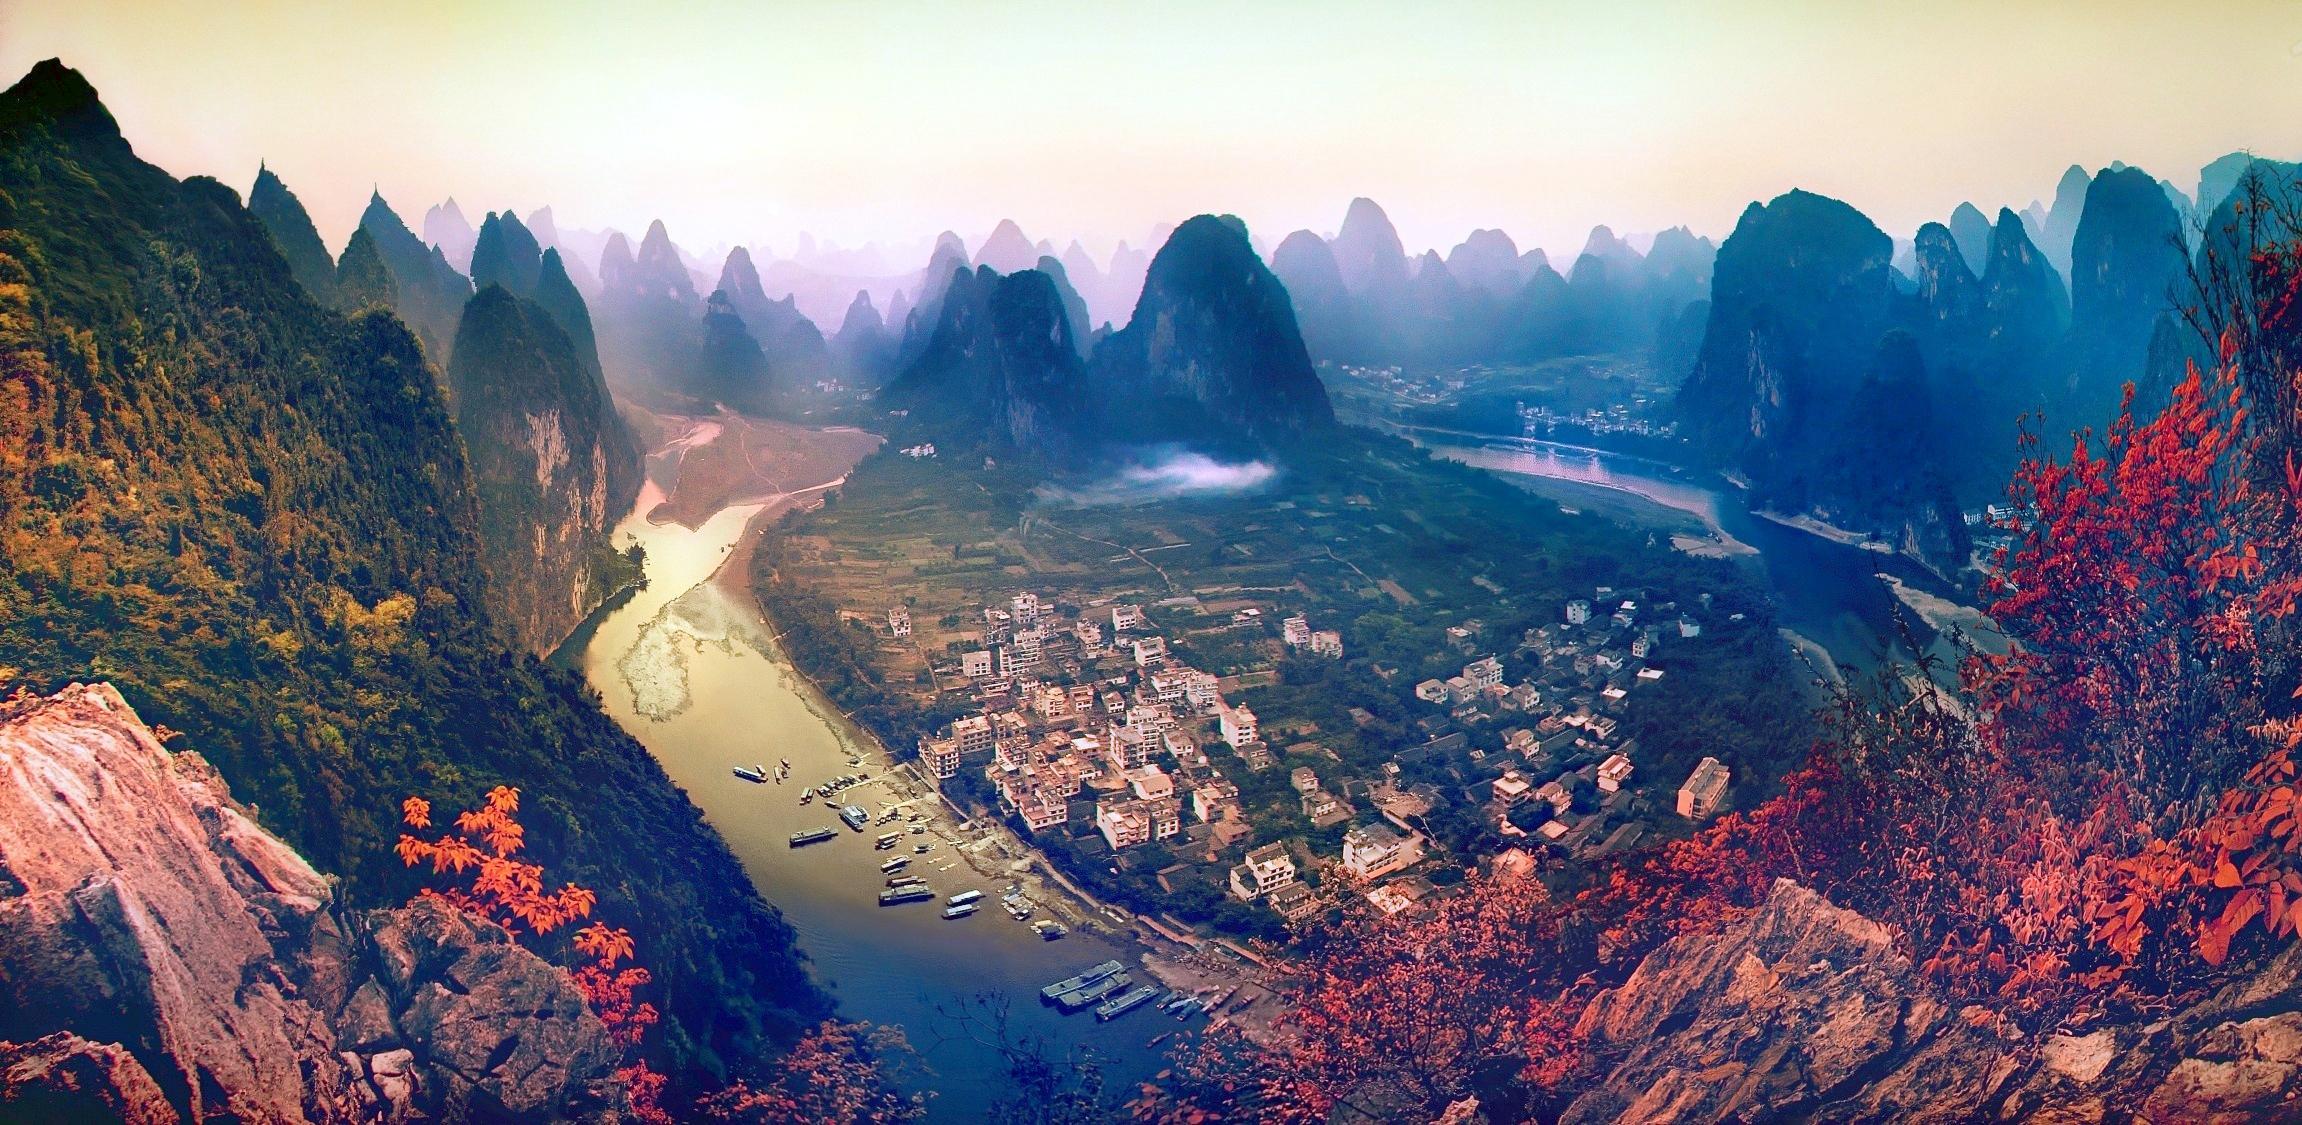 forest, mountains, town, sunset, fog, river, magical, China